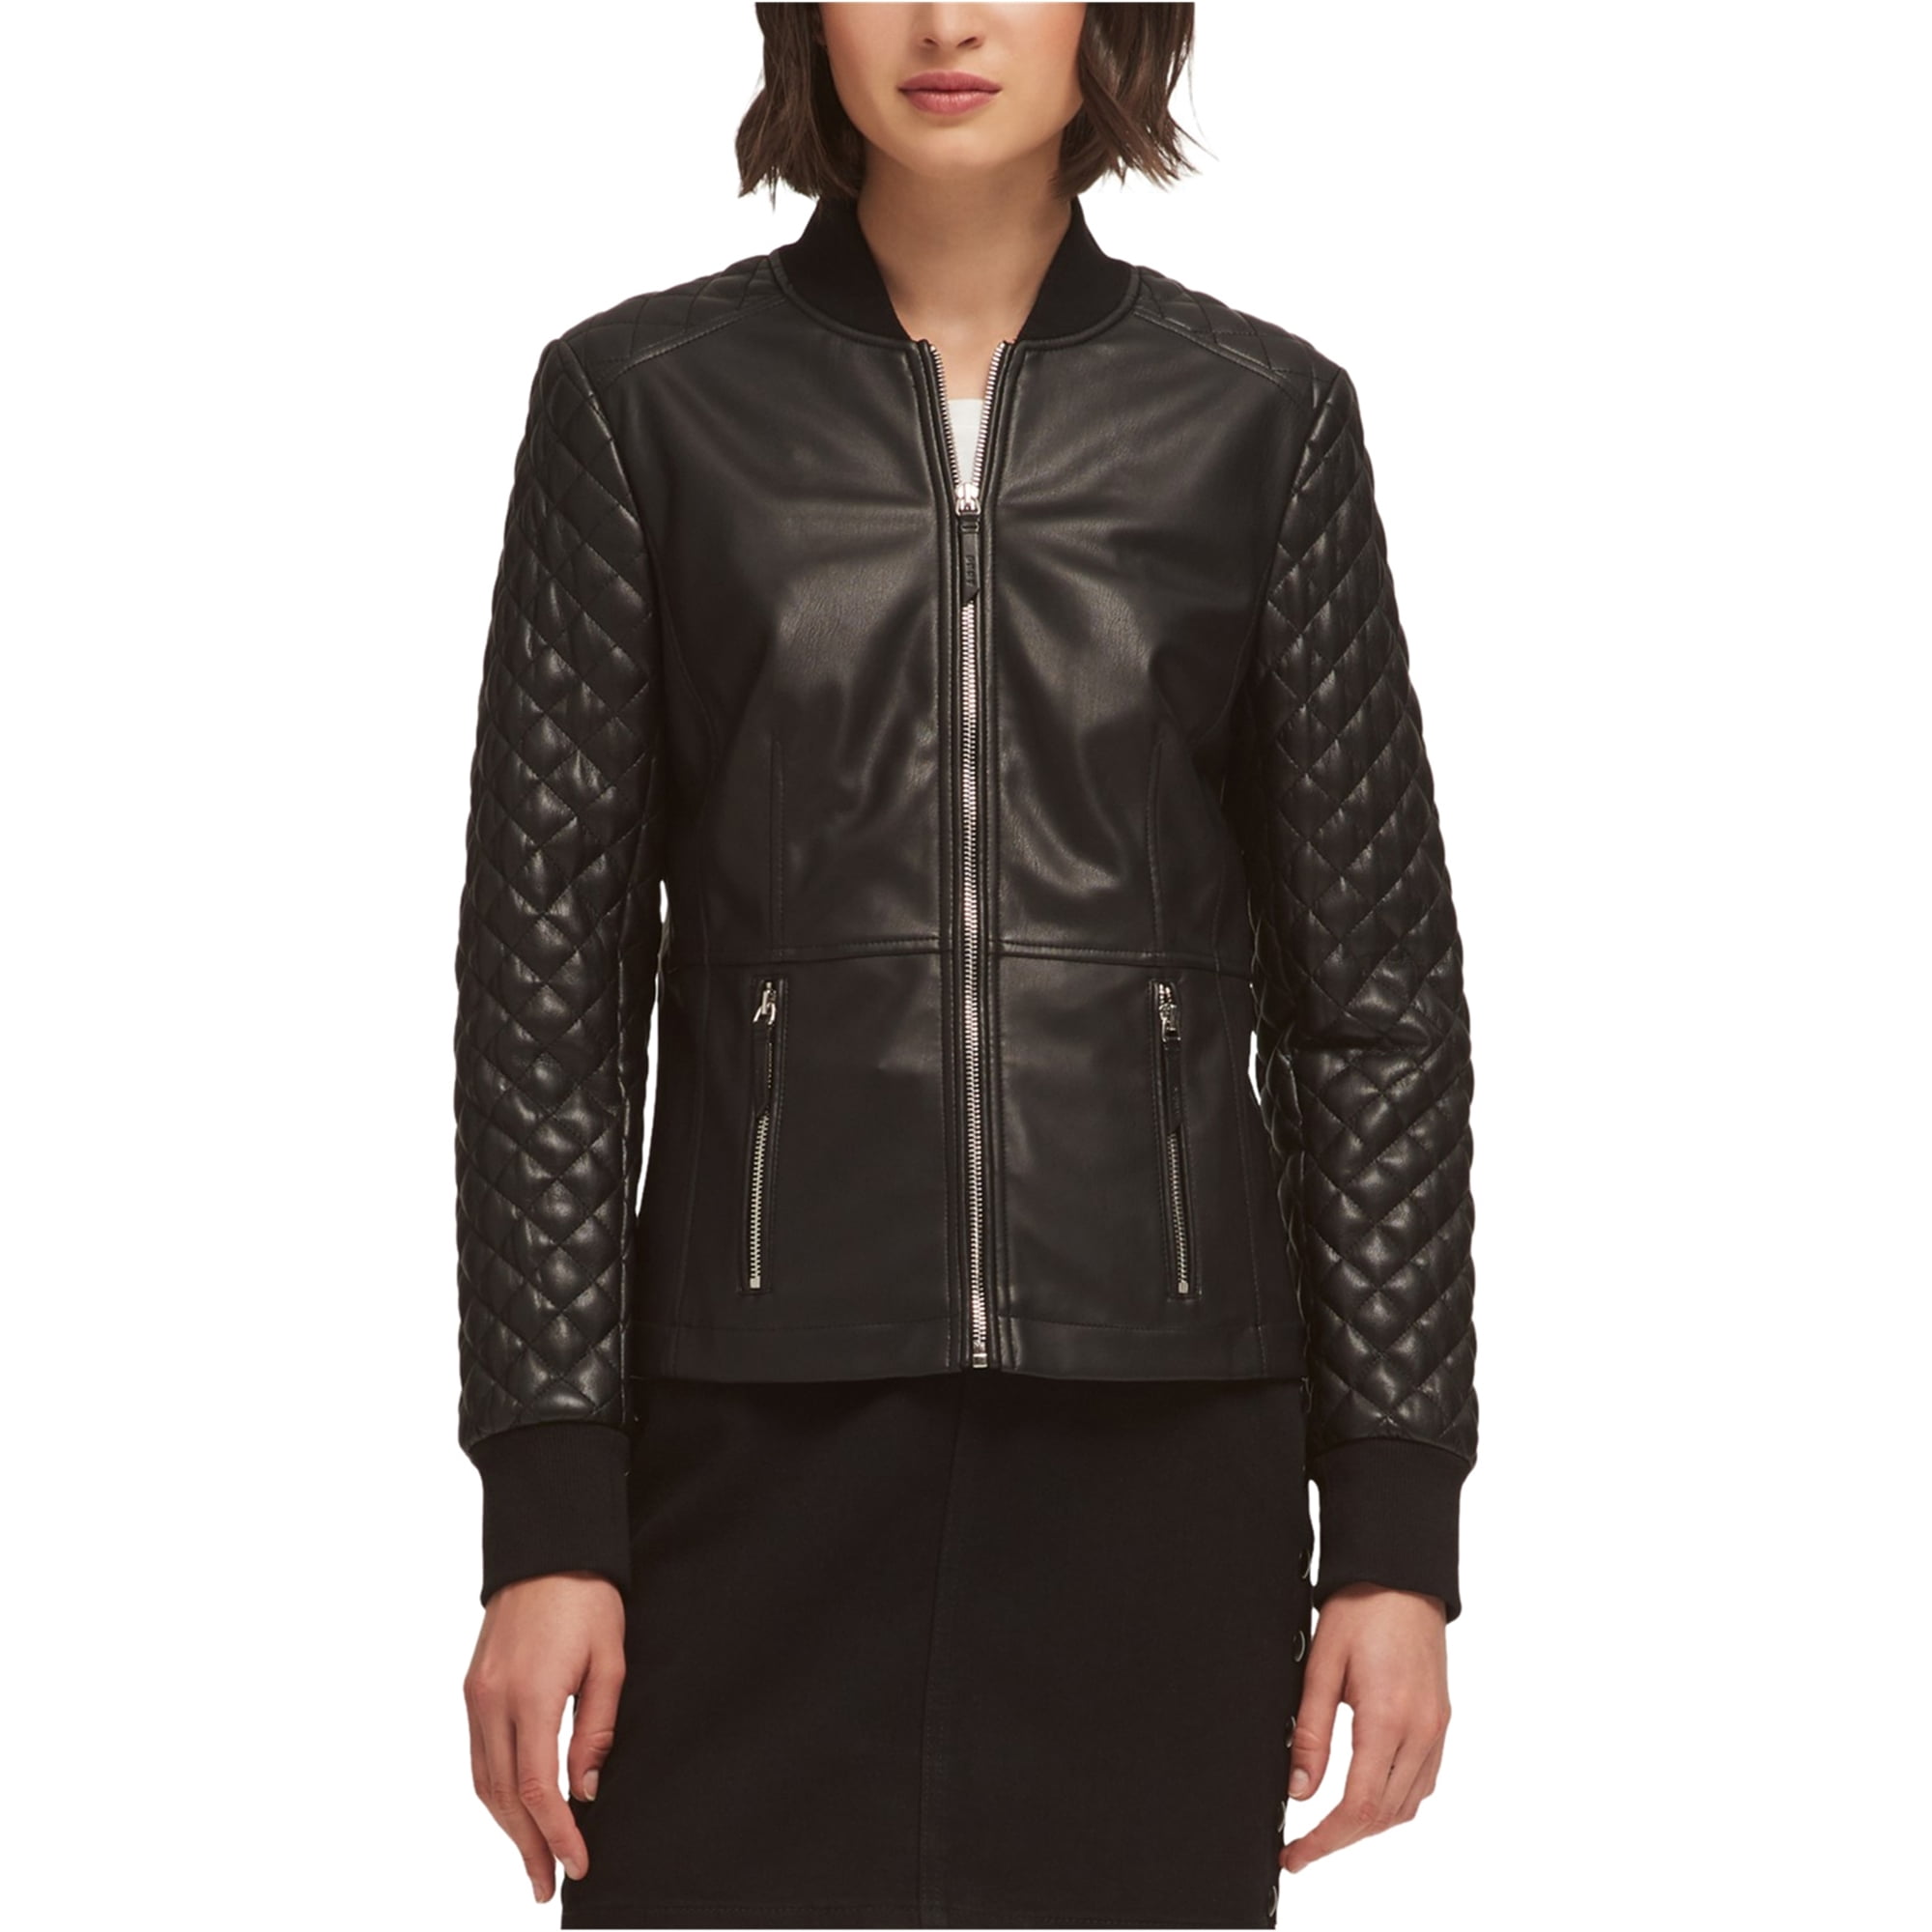 AmeriMark Women’s Faux Leather Jacket Front Zip Quilted Shoulders and Pockets